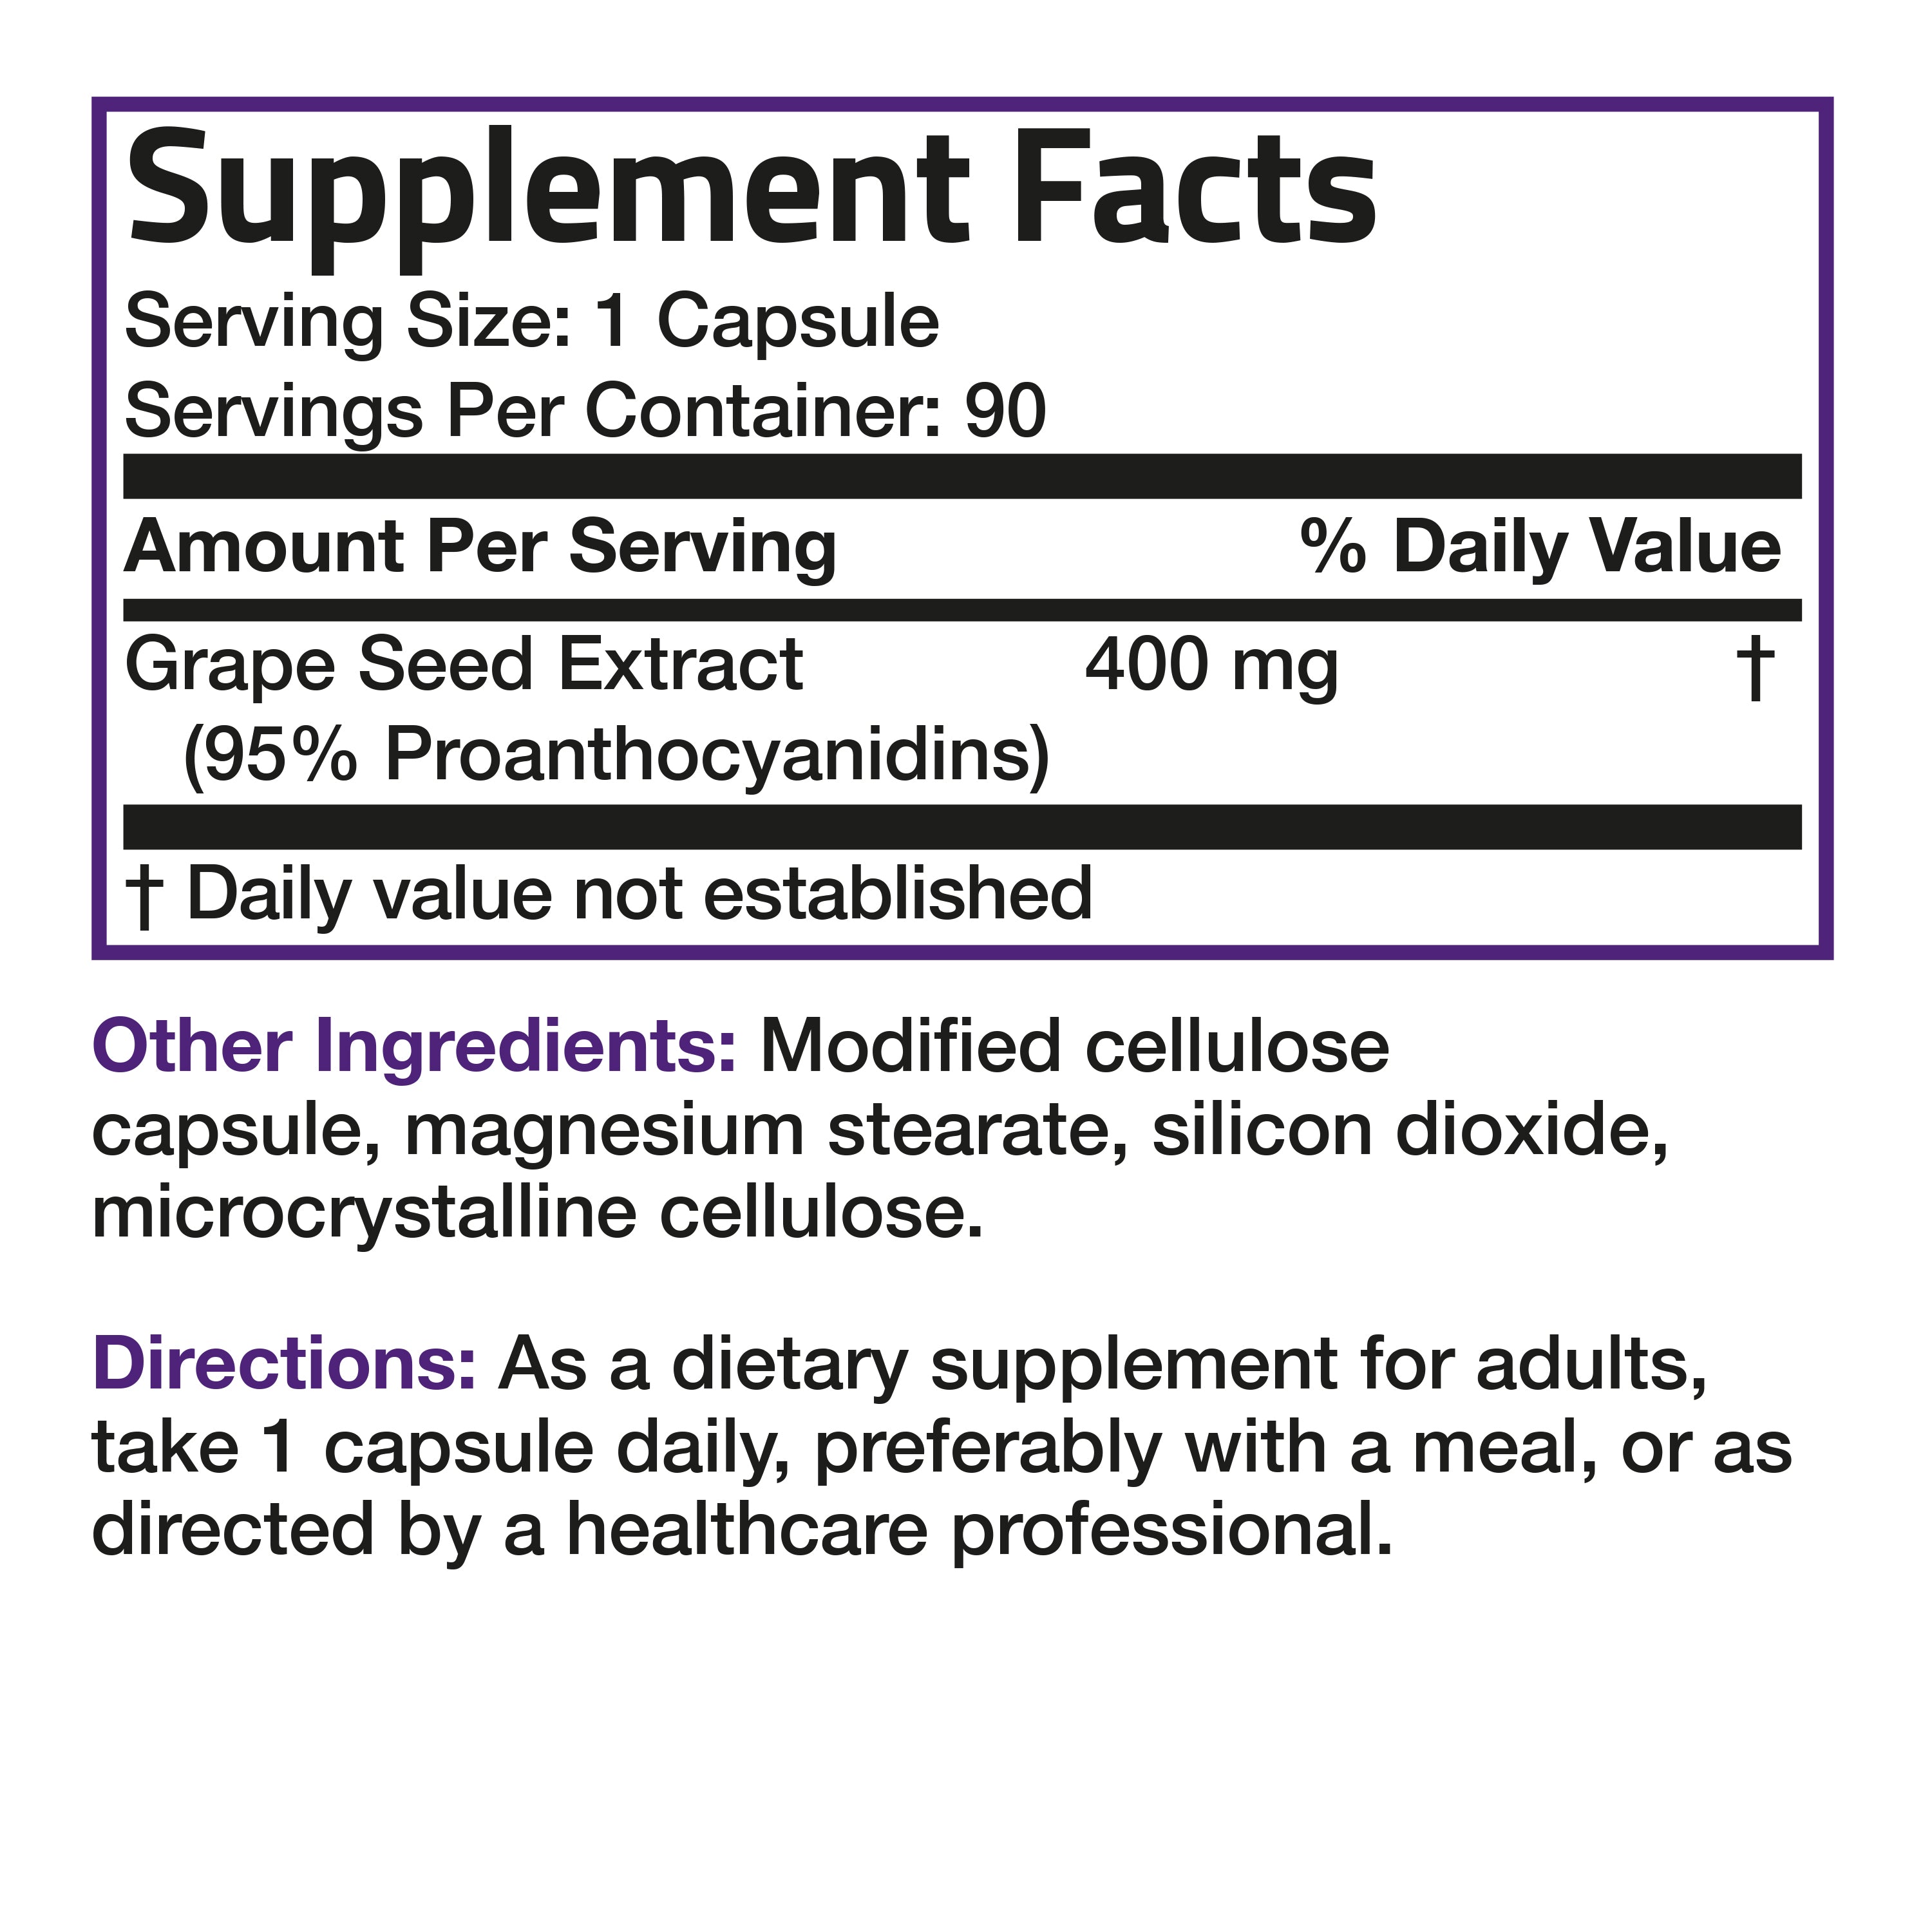 Grape Seed Extract Non-GMO - 400 mg view 6 of 6